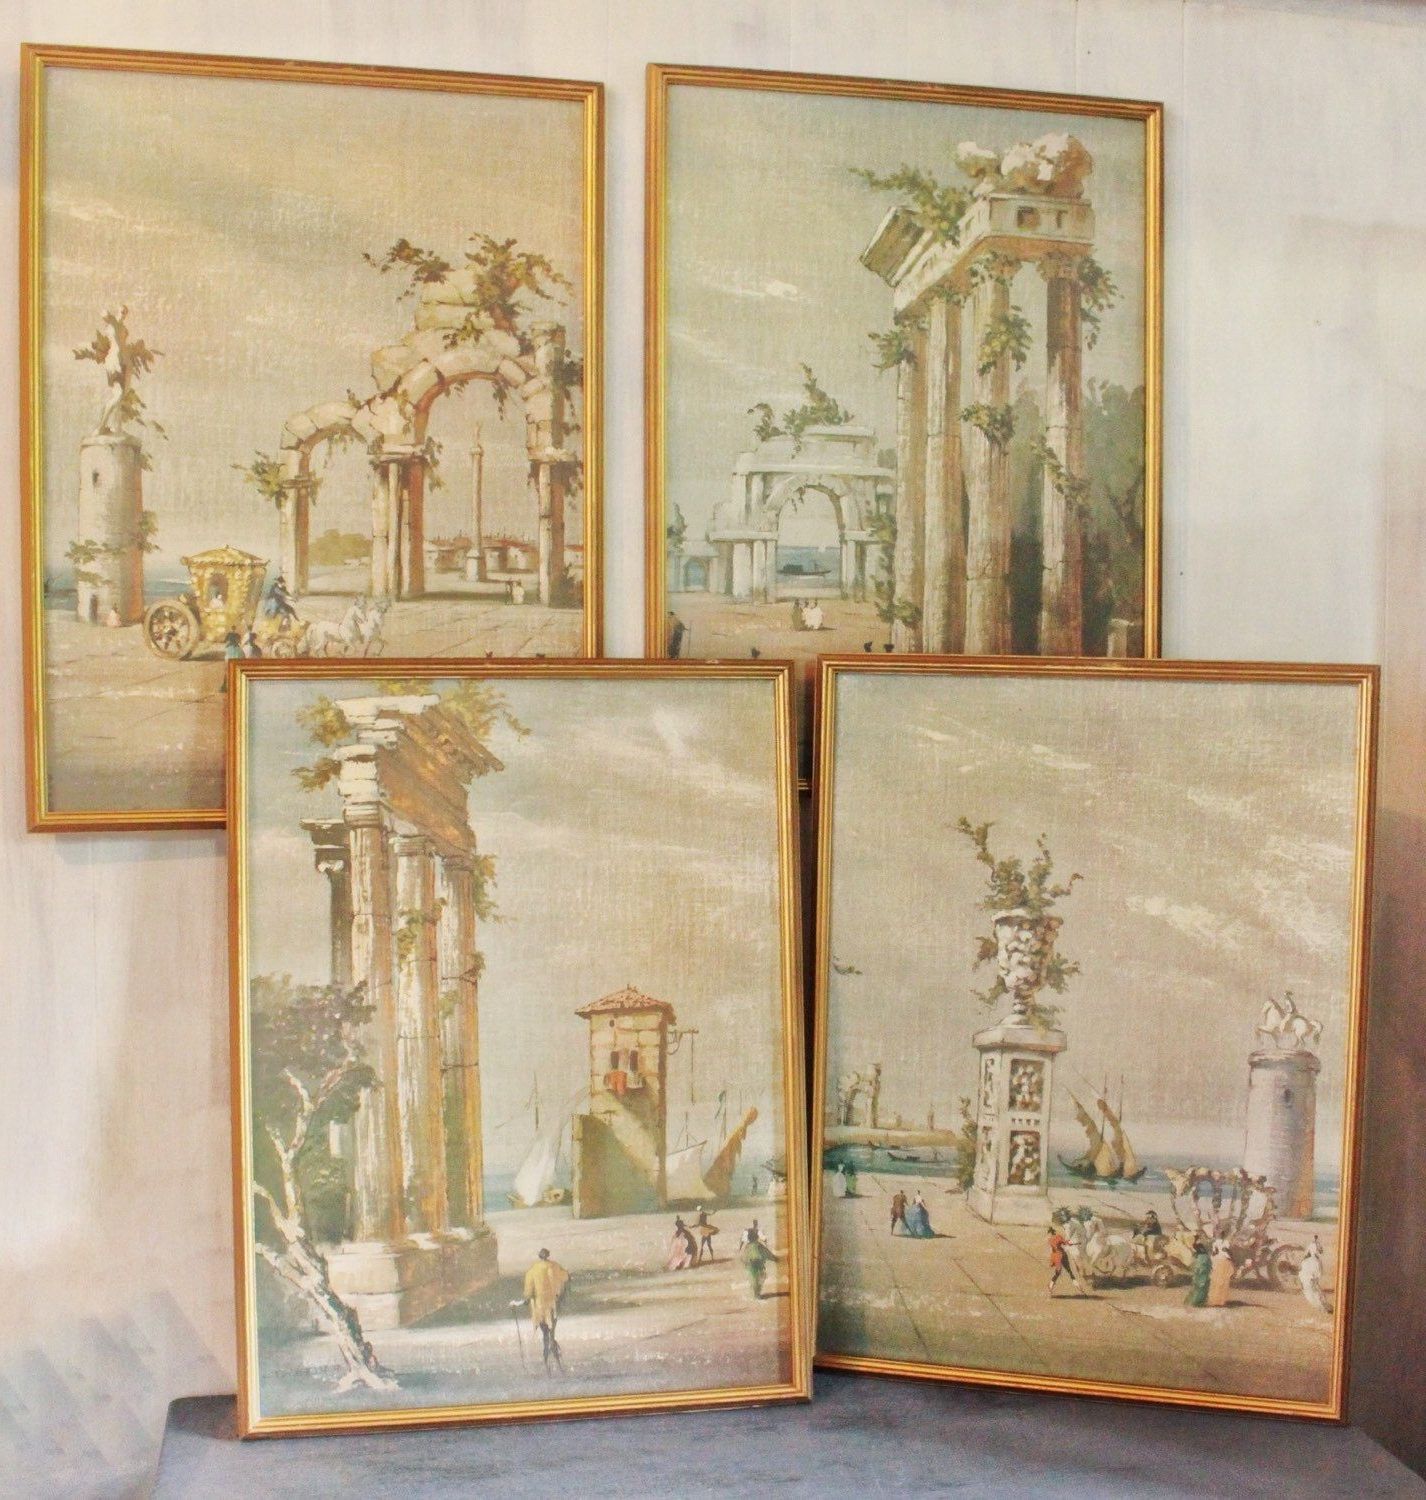 Trendy Italy Framed Art Prints Inside Large Framed Lithographs 1950s Italian Style Wall Decor (View 1 of 20)